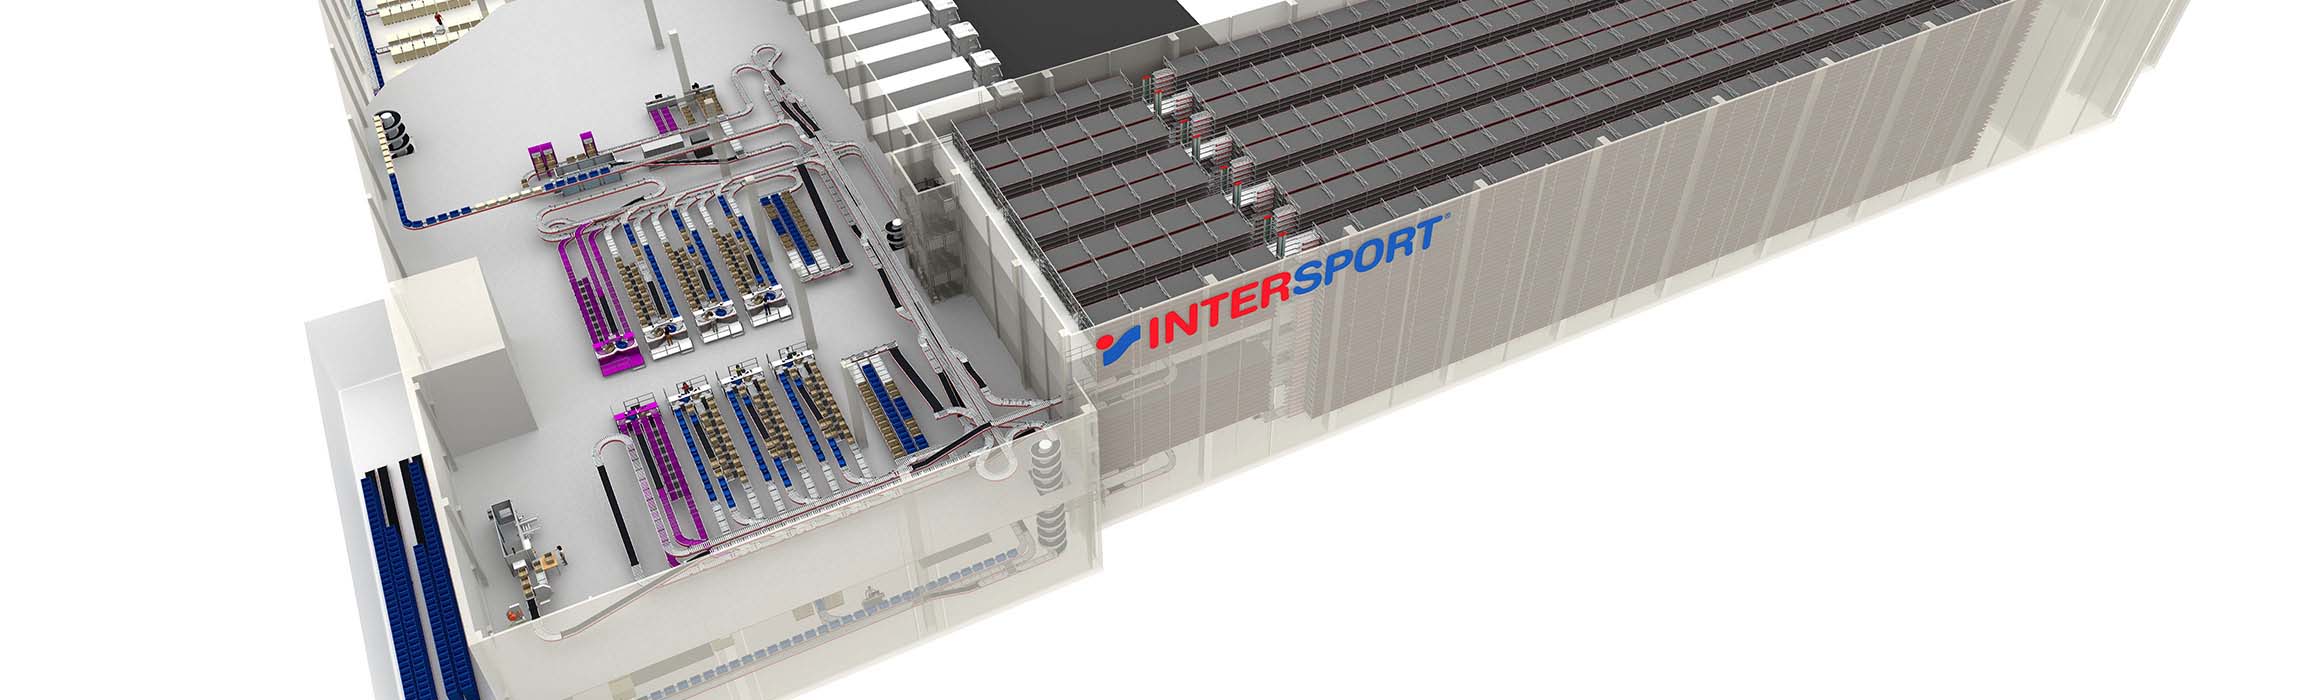 Intersport increases performance and efficiency with TGW.